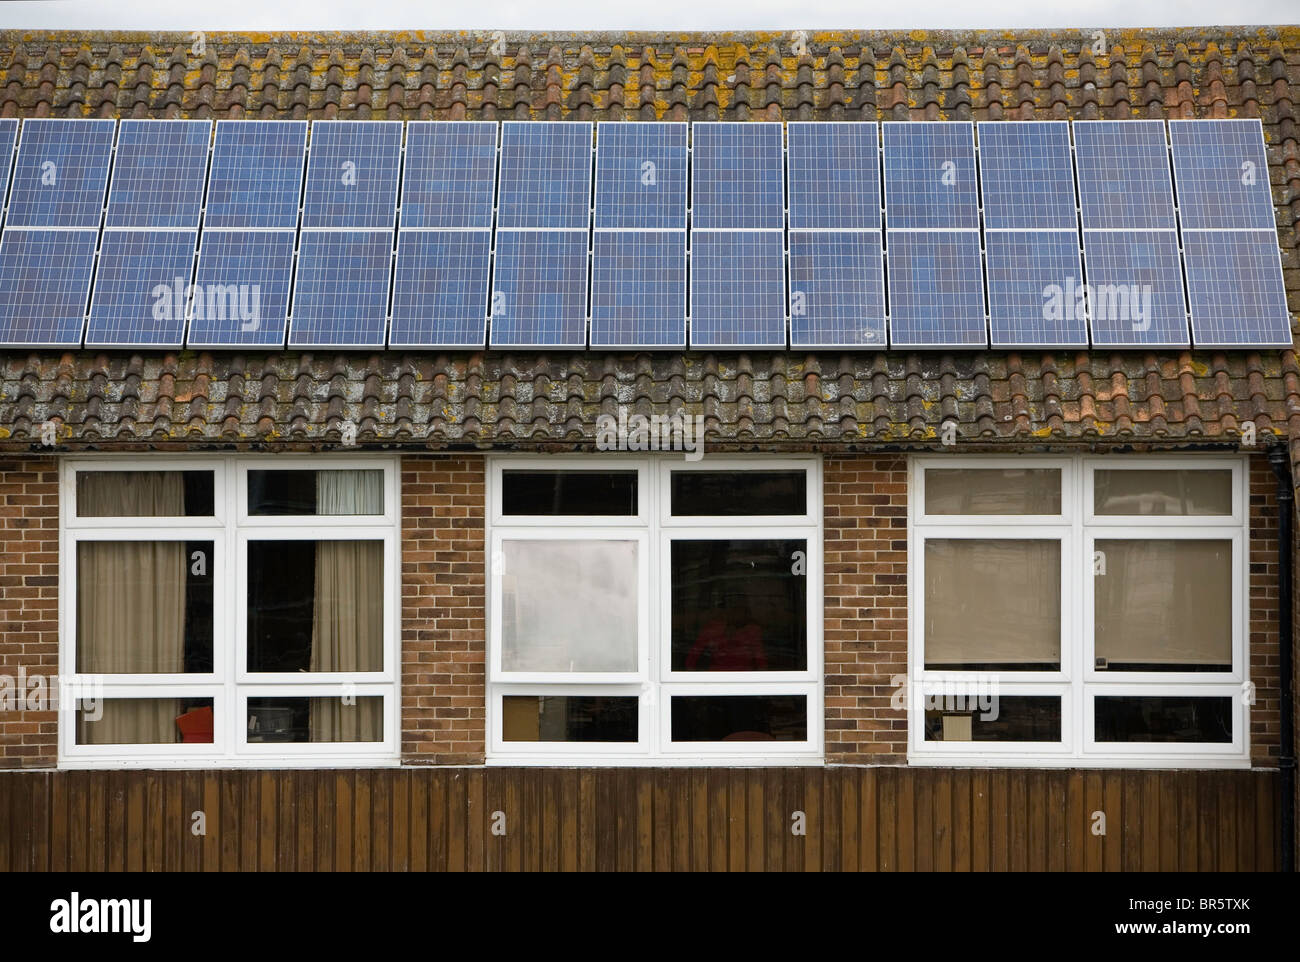 Solar PV Photo Voltaic panels on the roof of Ringmer community college. Stock Photo